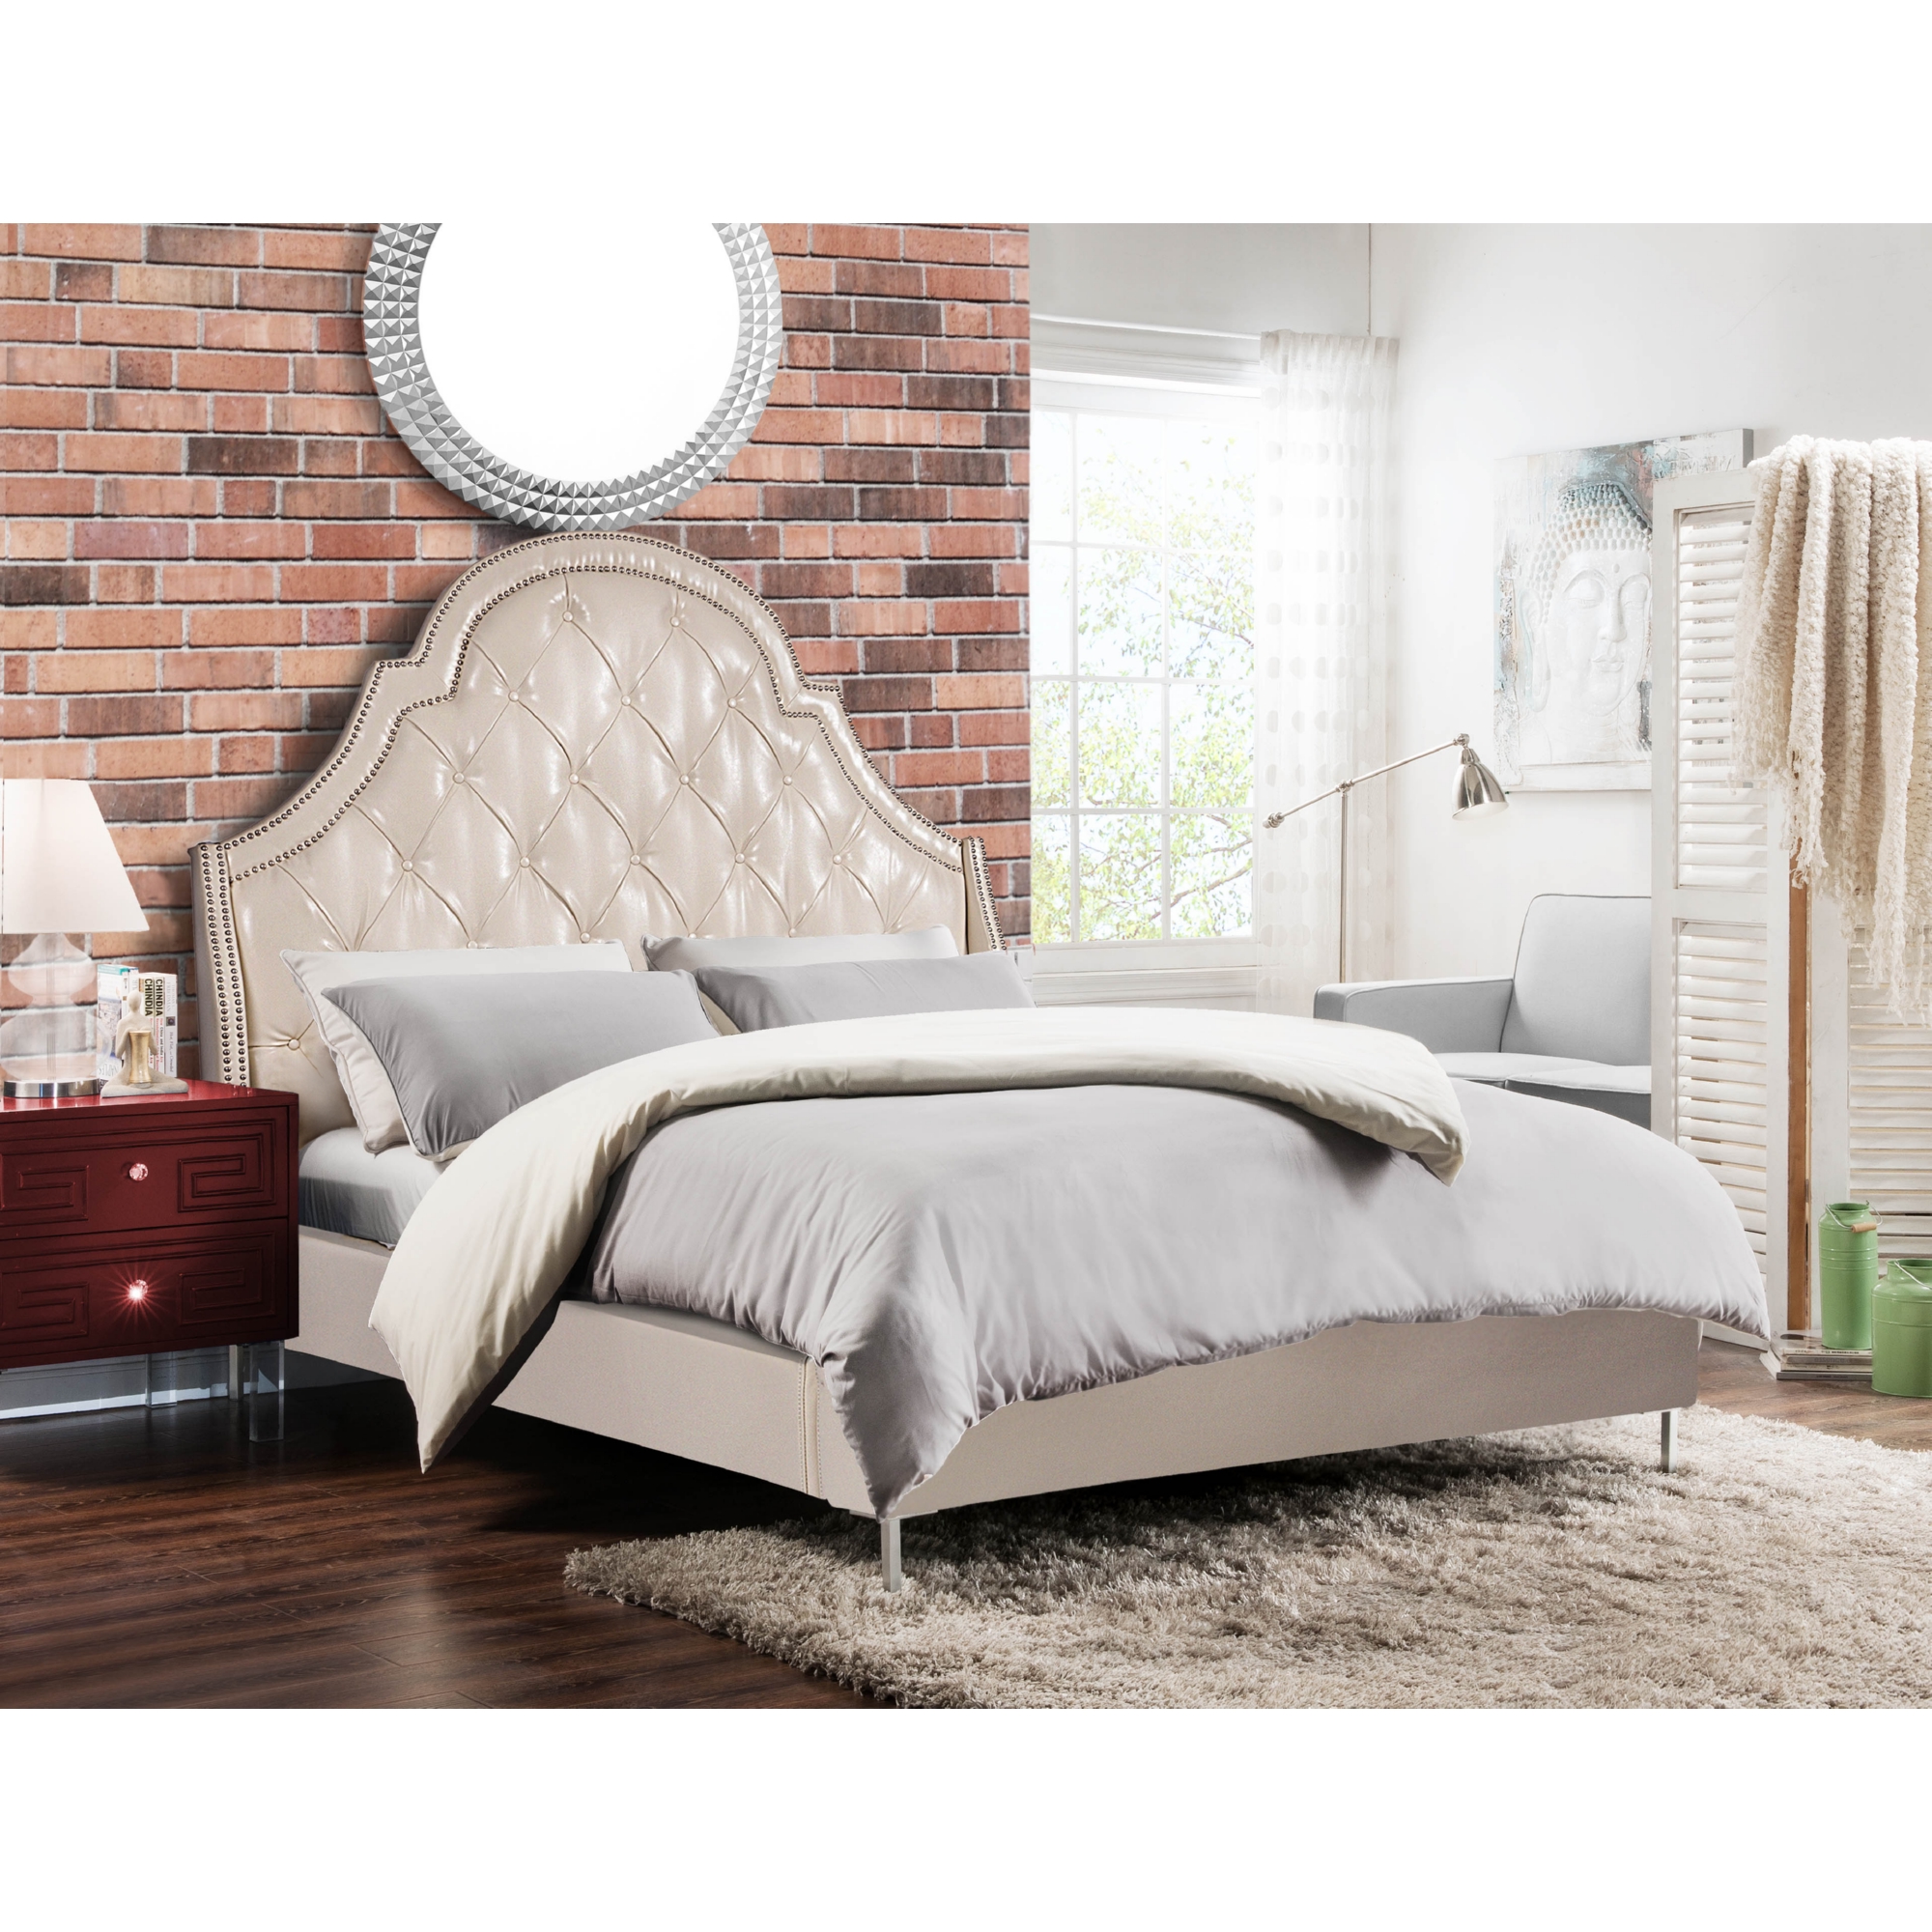 Chic Home BD16-13CM-Q1 Napoleon Arched Queen Bed in Tufted Cream White